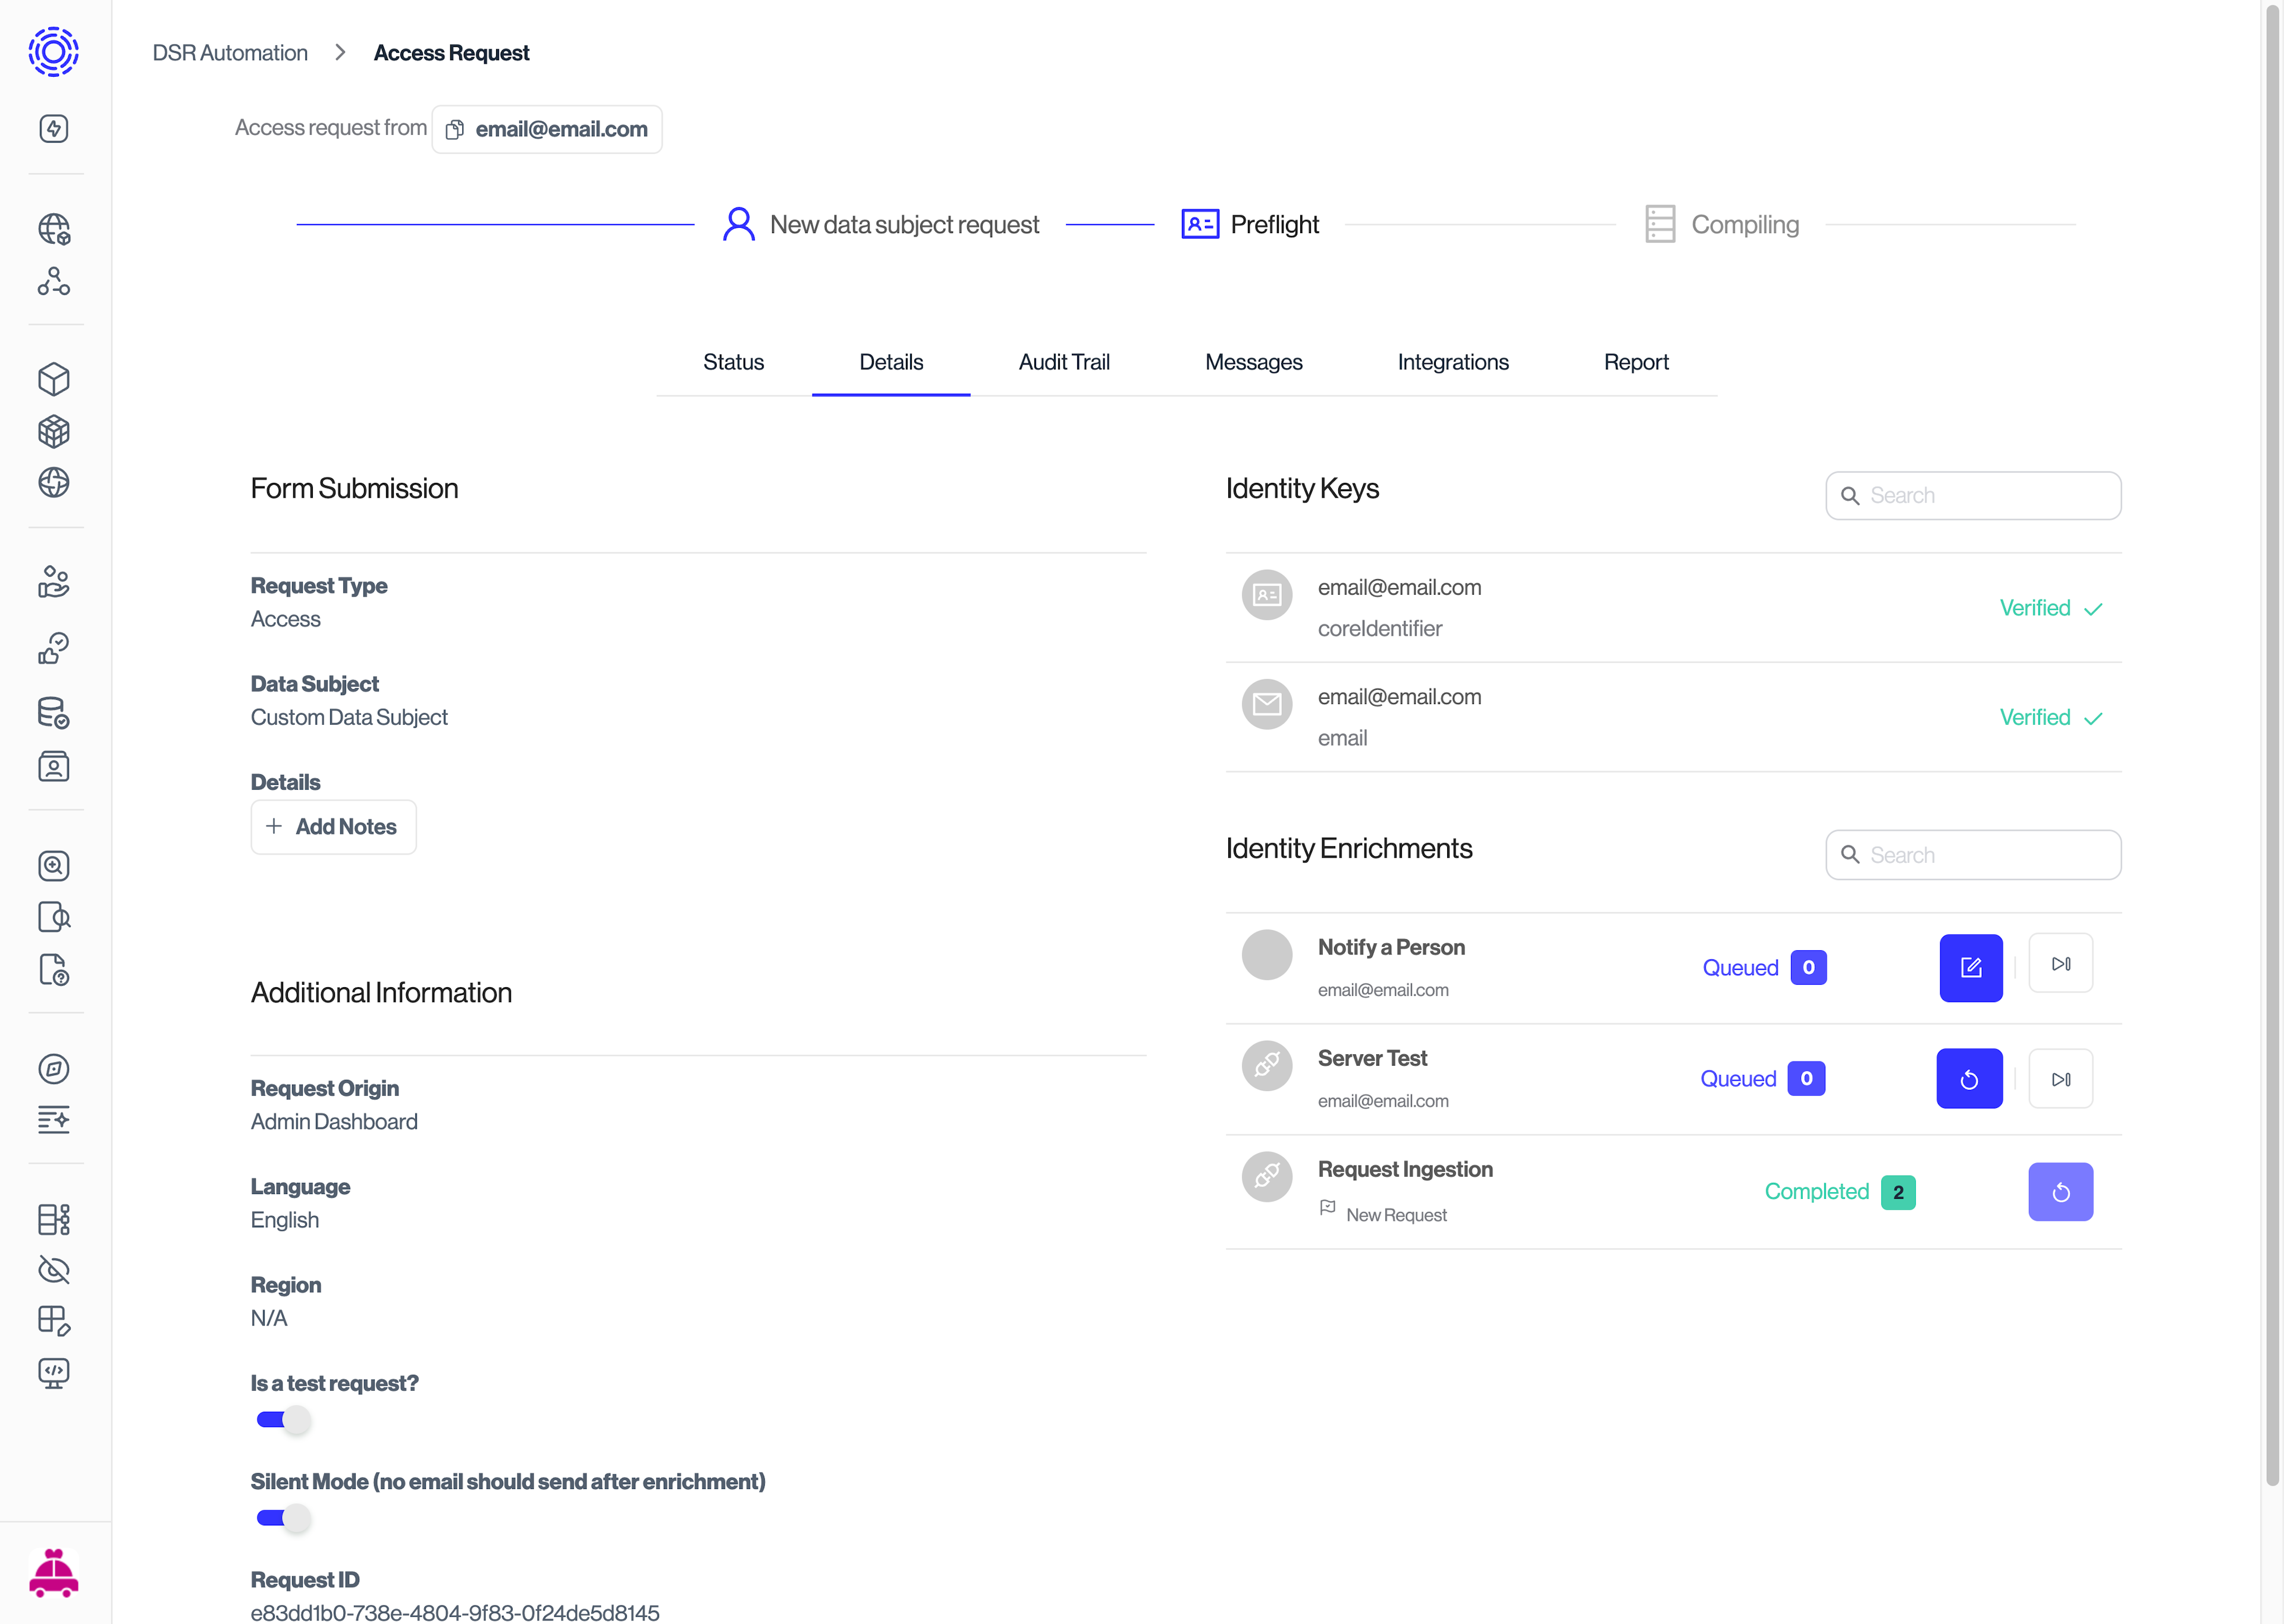 The enrichment phase inside the Admin Dashboard